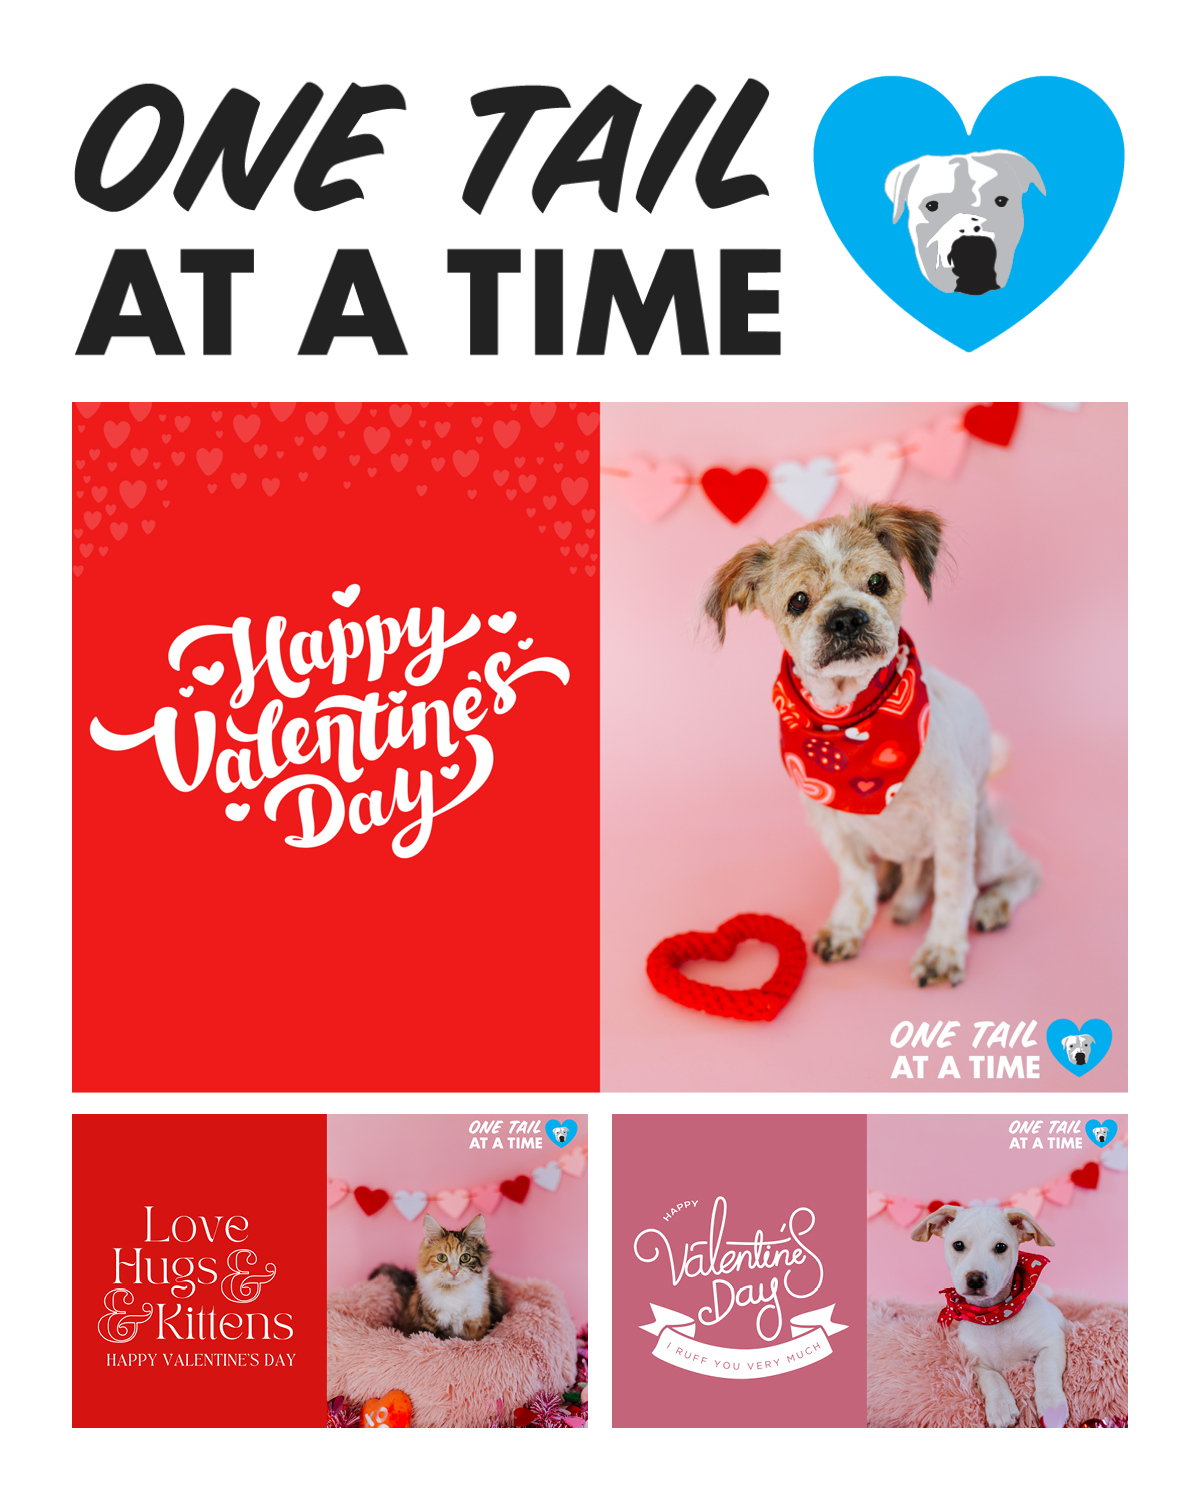 Valentine’s Day eCards from a nonprofit digital fundraising campaign for an animal shelter